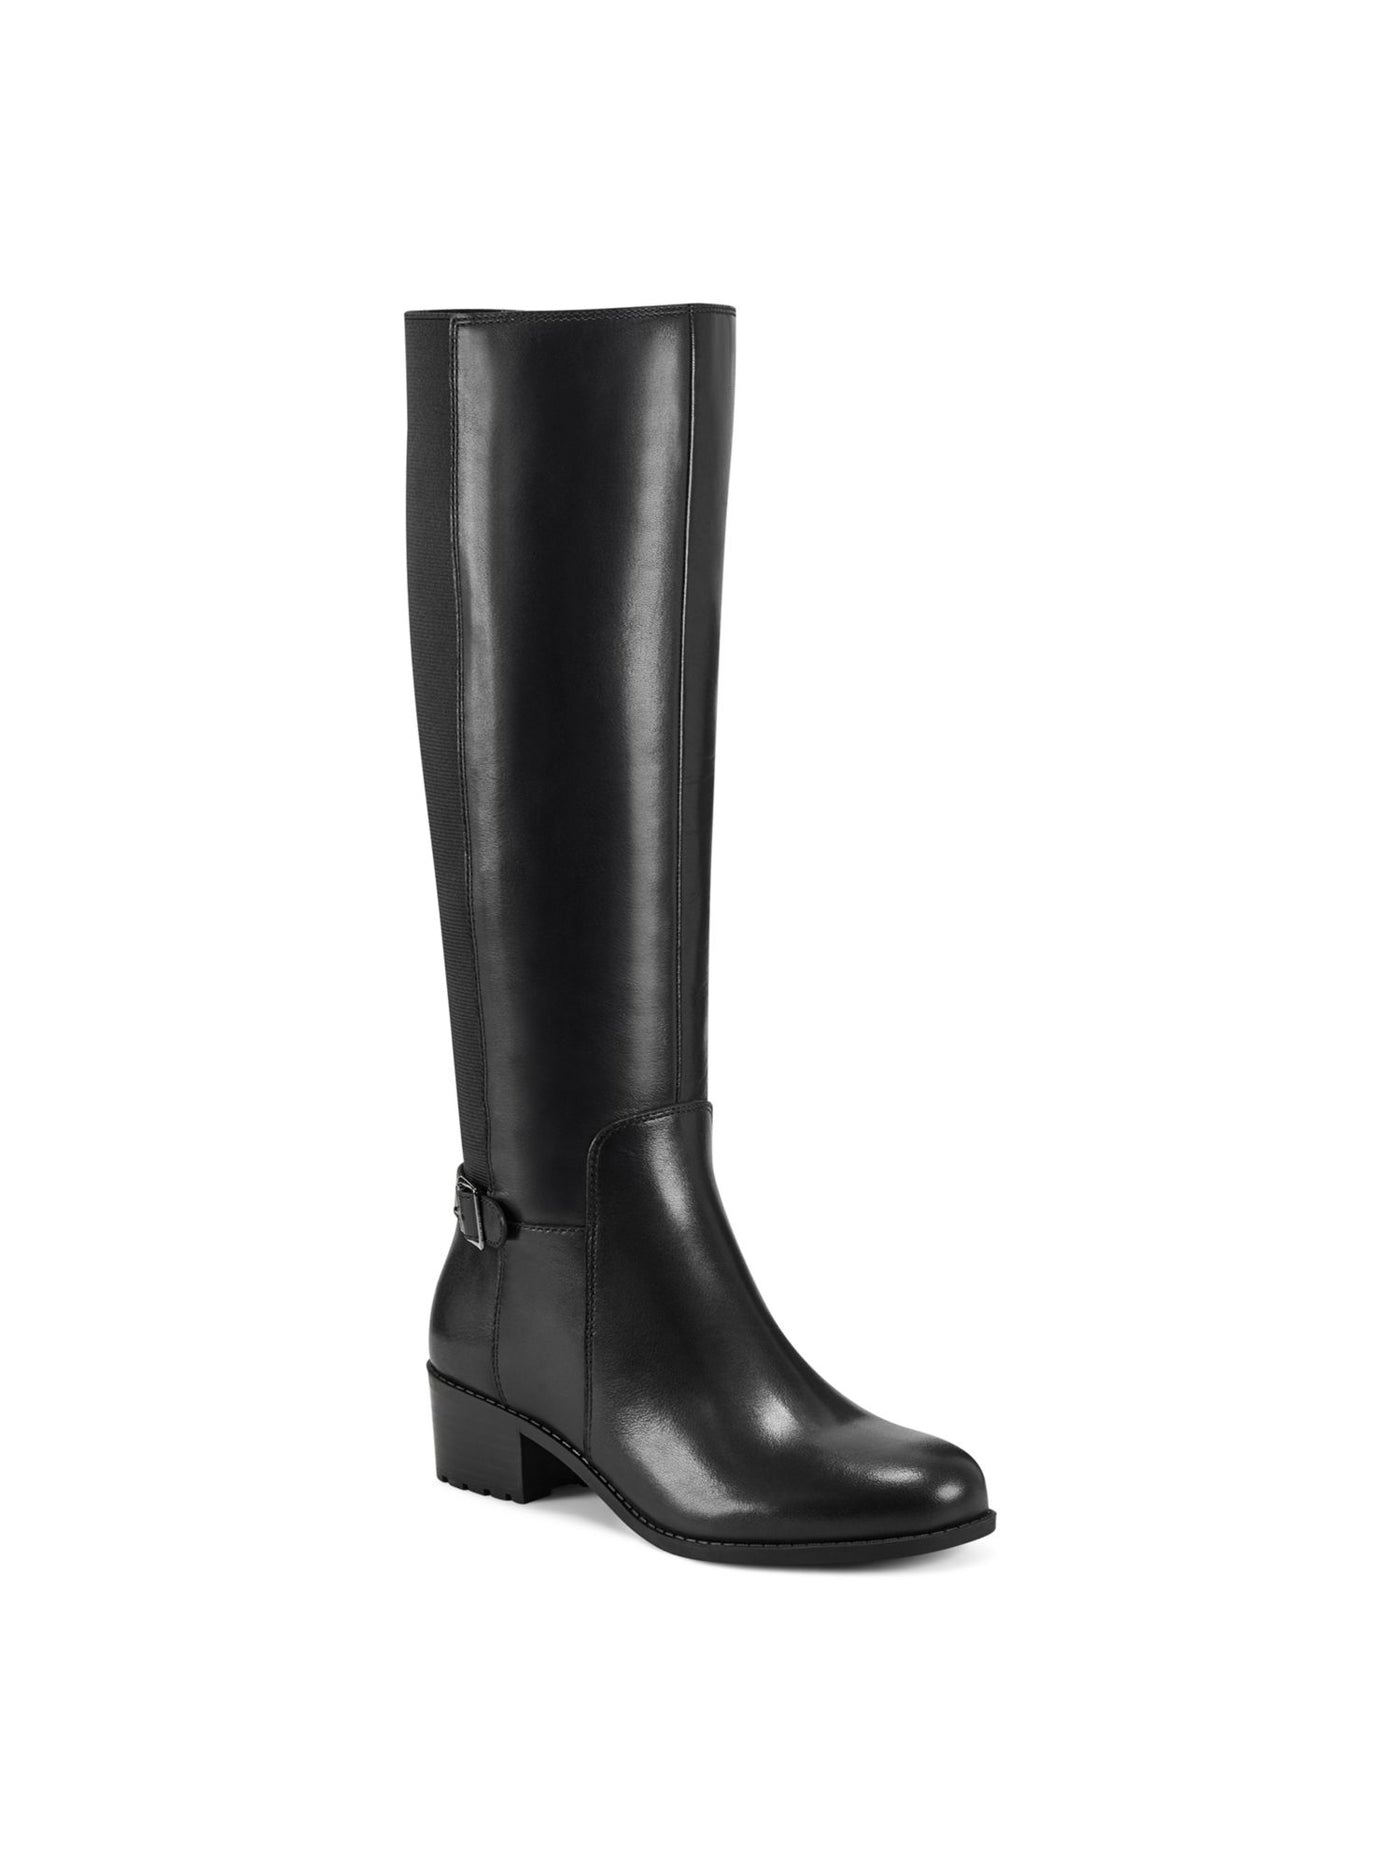 EASY SPIRIT Womens Black Cushioned Arch Support Chaza Round Toe Block Heel Leather Riding Boot 7.5 W WC